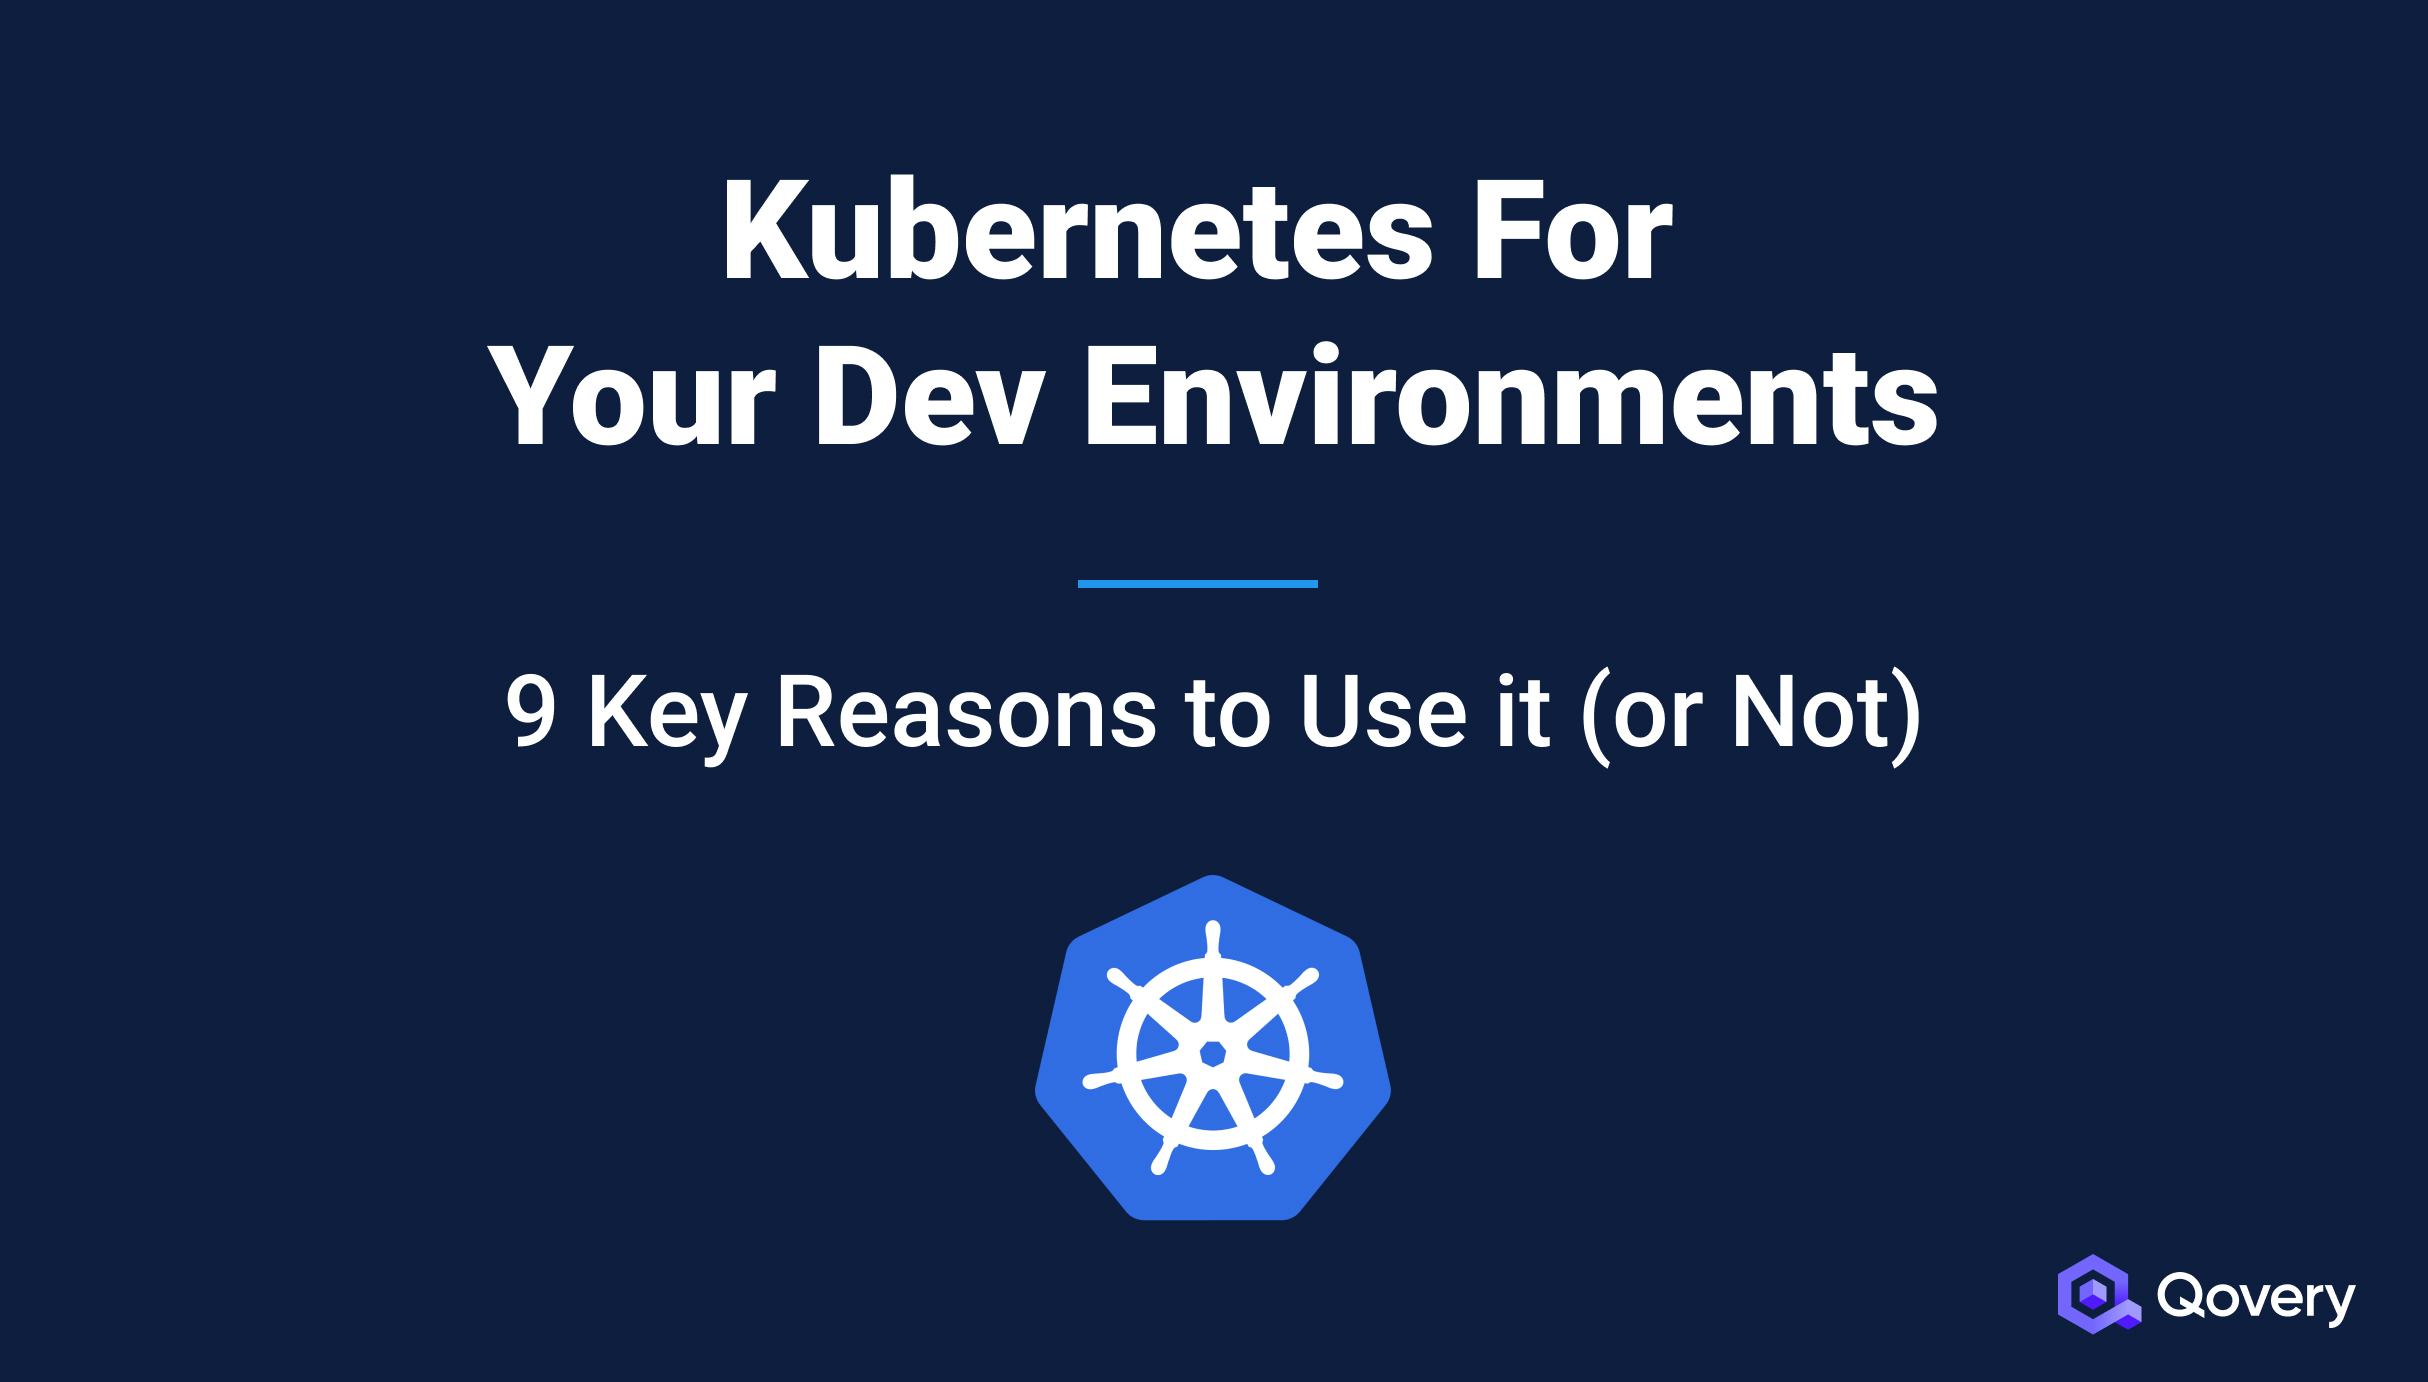 9 Key Reasons to Use or Not Kubernetes for Your Dev Environments in 2023 - Qovery